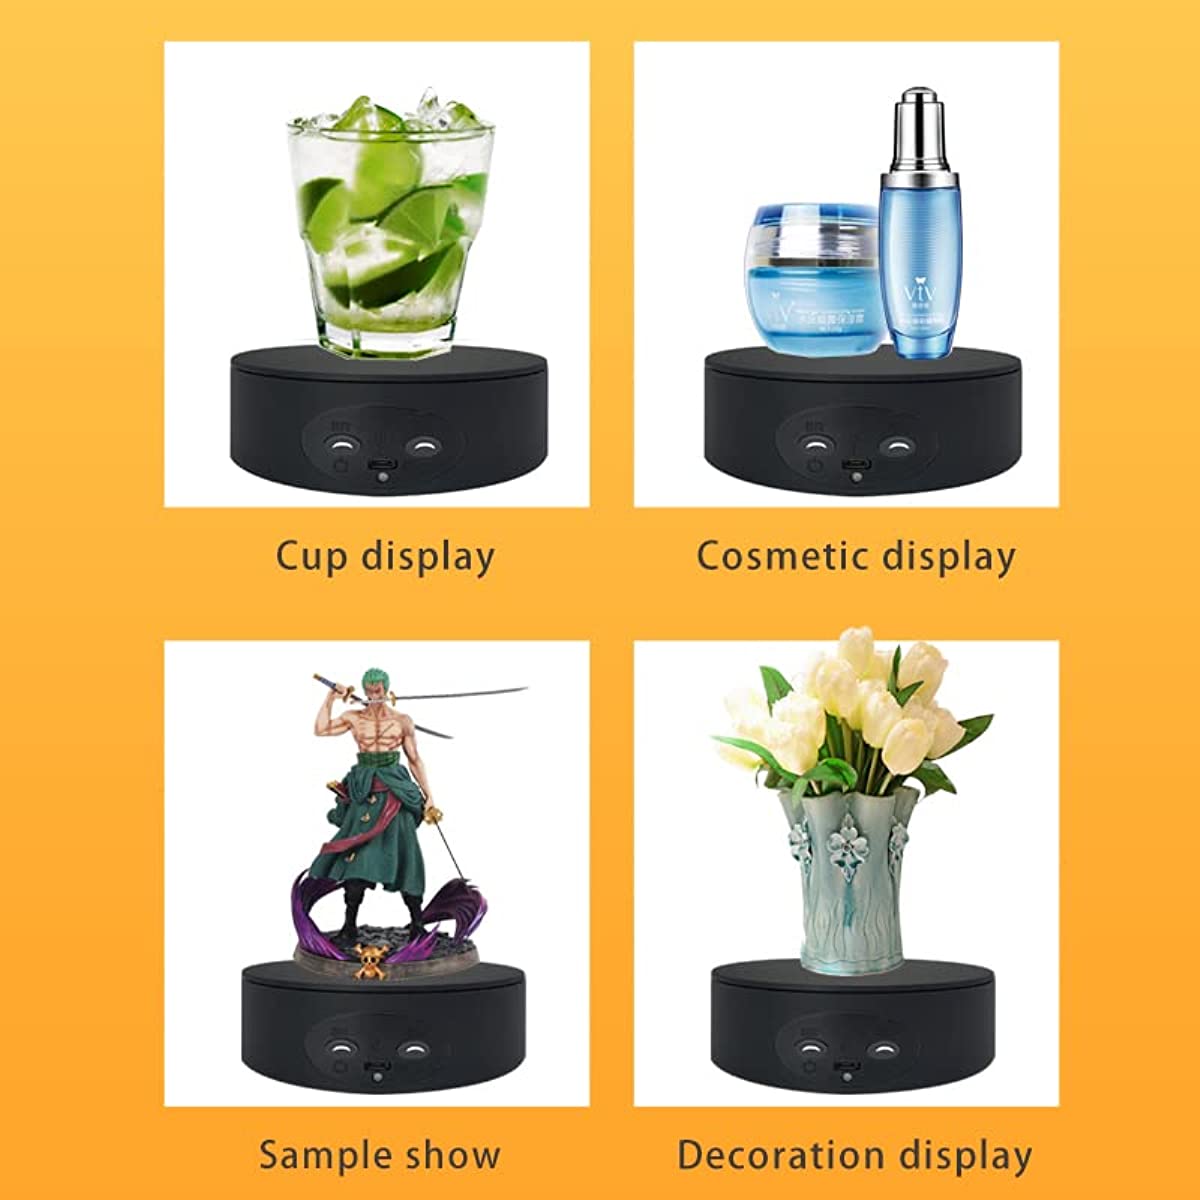 LED Motorized Rotating Display Base 3D Cup Display Stand Turner for Tumbler  Cup